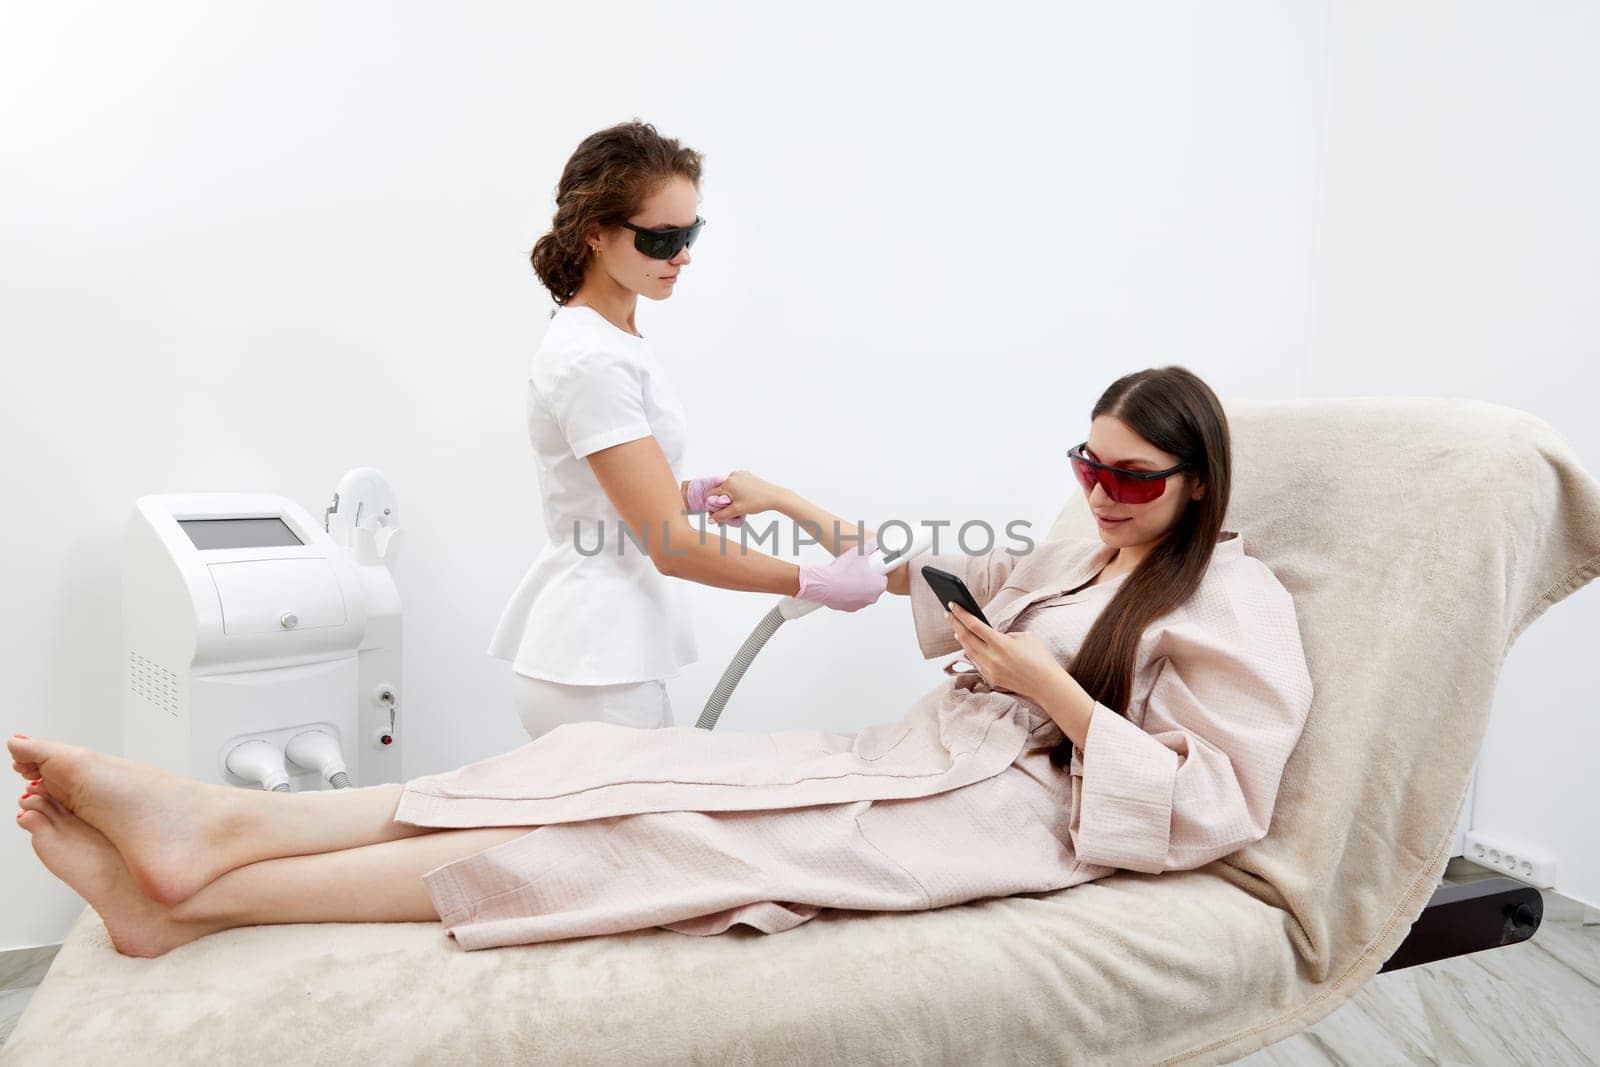 Beauty modernized as a woman basks in the calm of a salon during her arm's laser hair treatment